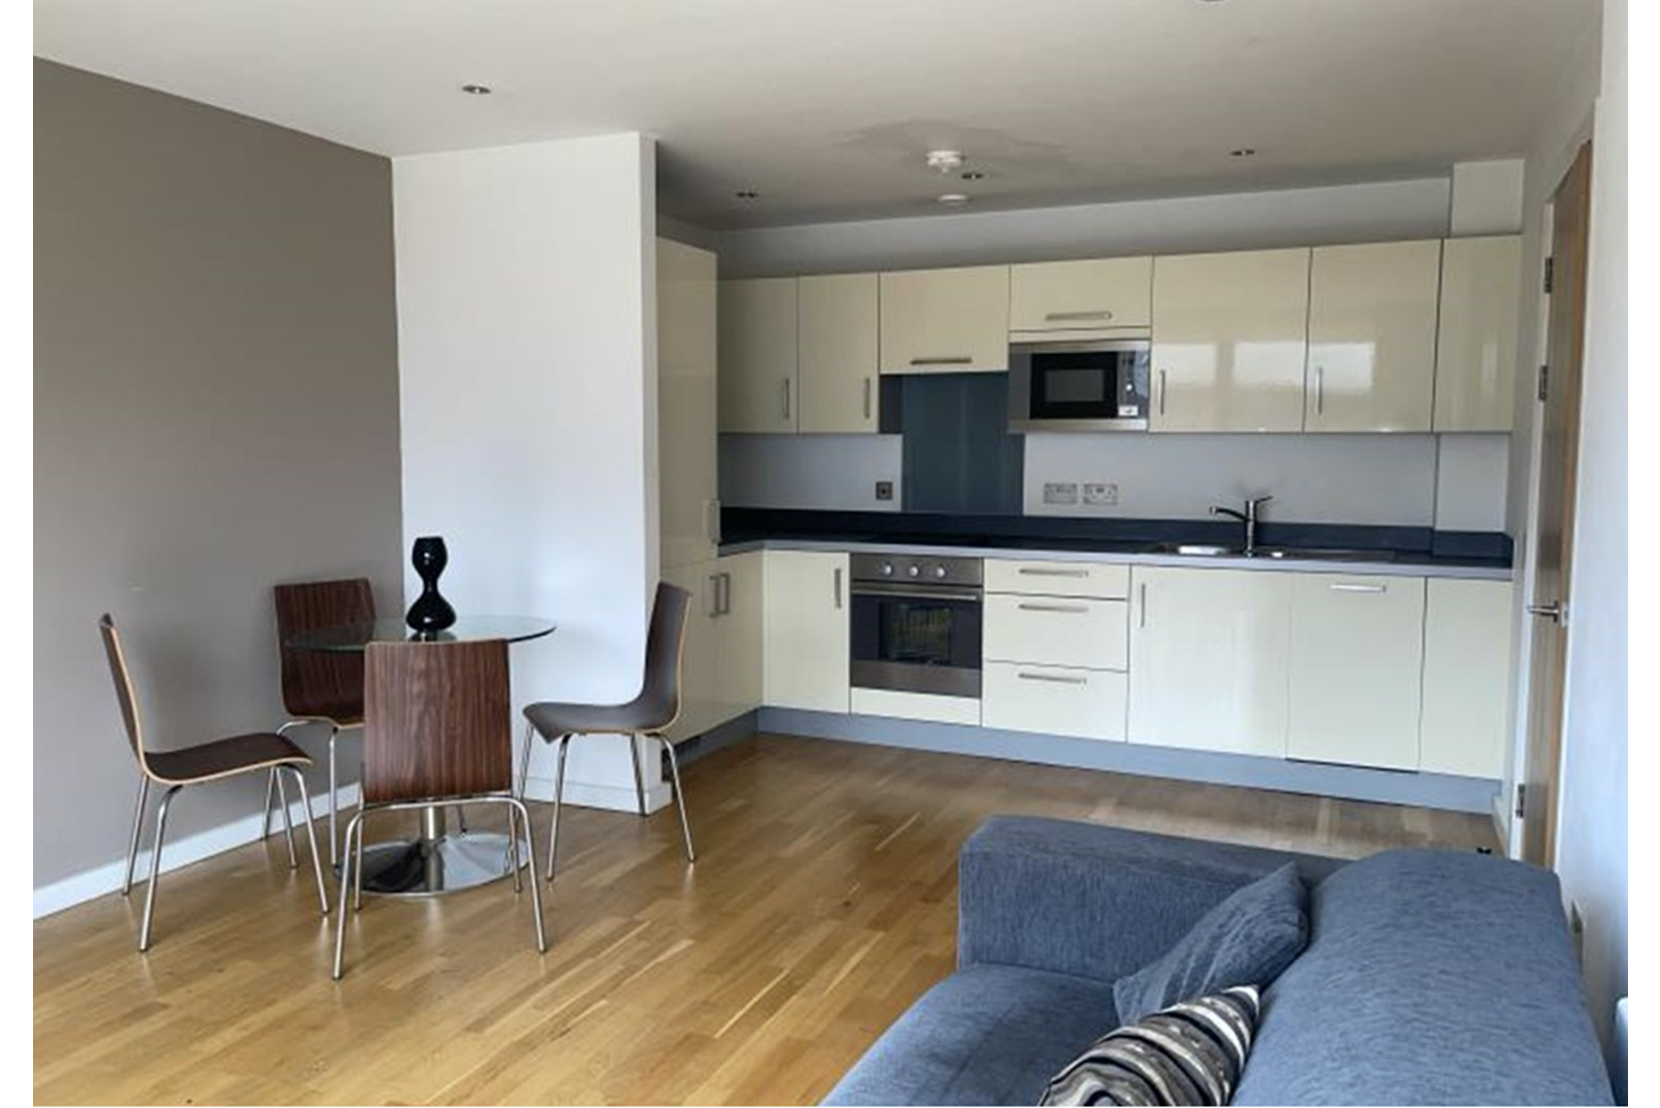 Apartments to Rent by Northern Group at Flint Glass Wharf, Manchester, M4, kitchen dining area